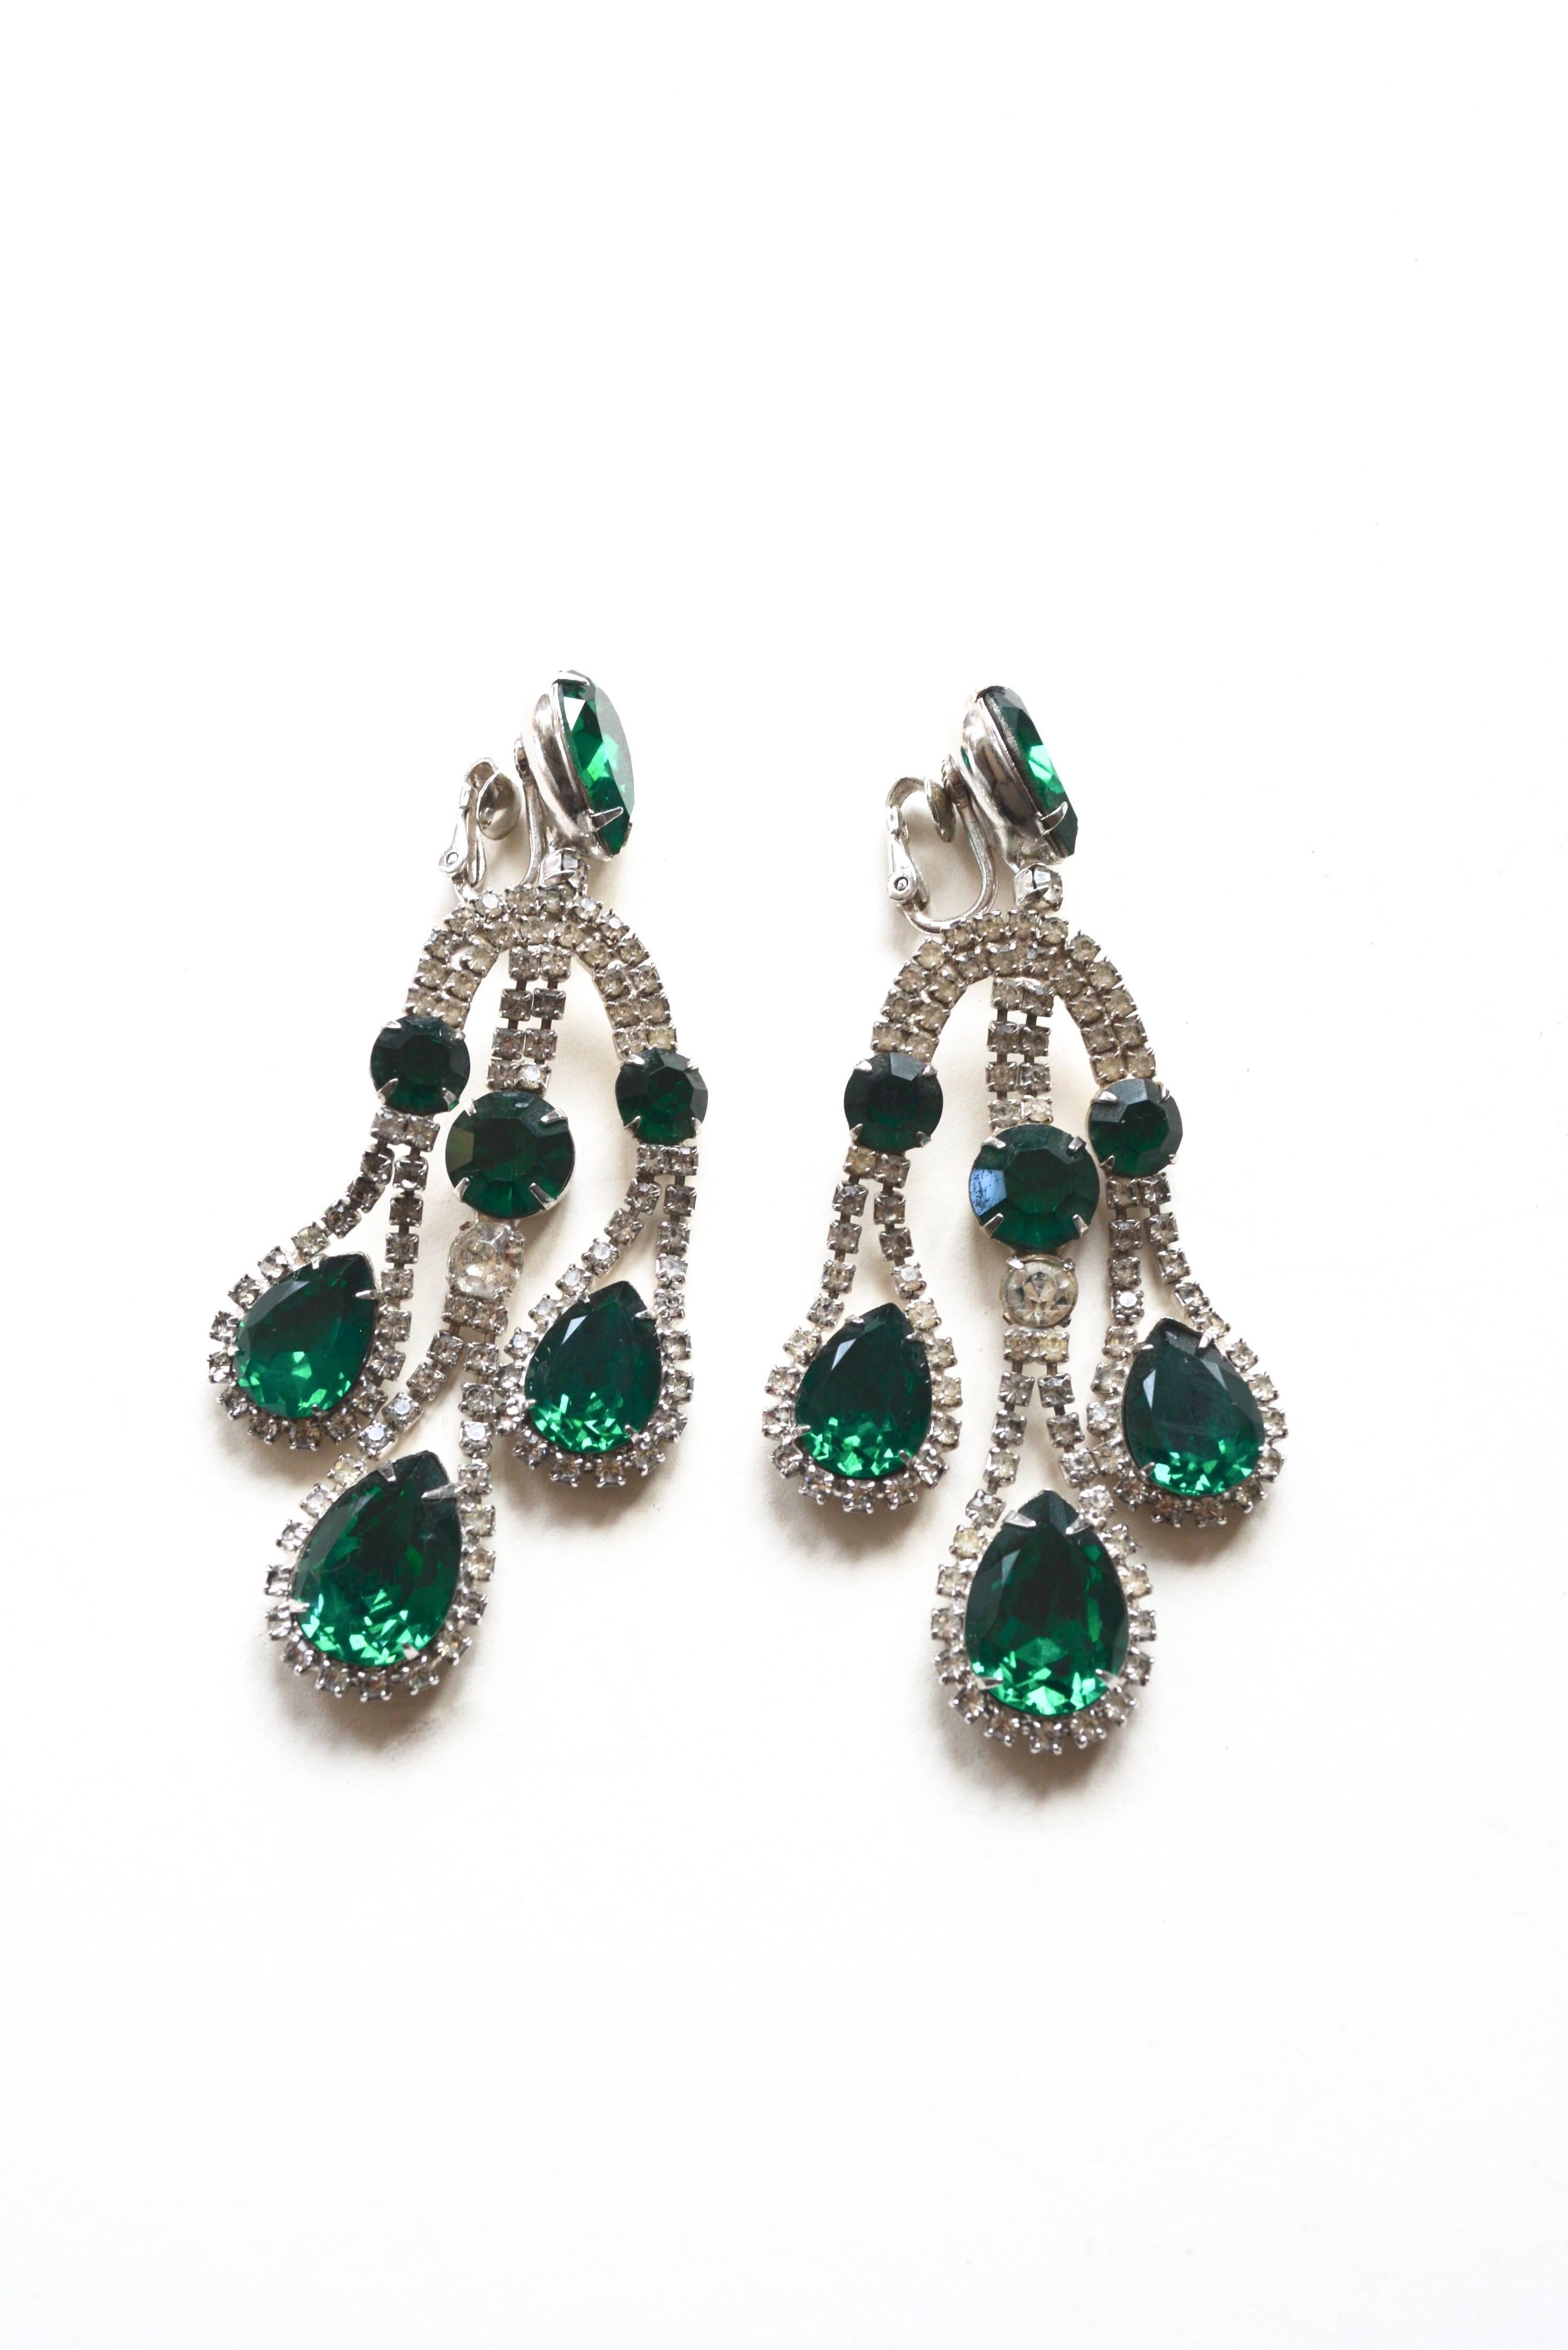 1960s signed Napier large emerald and rhinestone chandelier earrings. Unique design and wearable.  Good condition overall with mild stone wear to a few stones. Measures 3.5